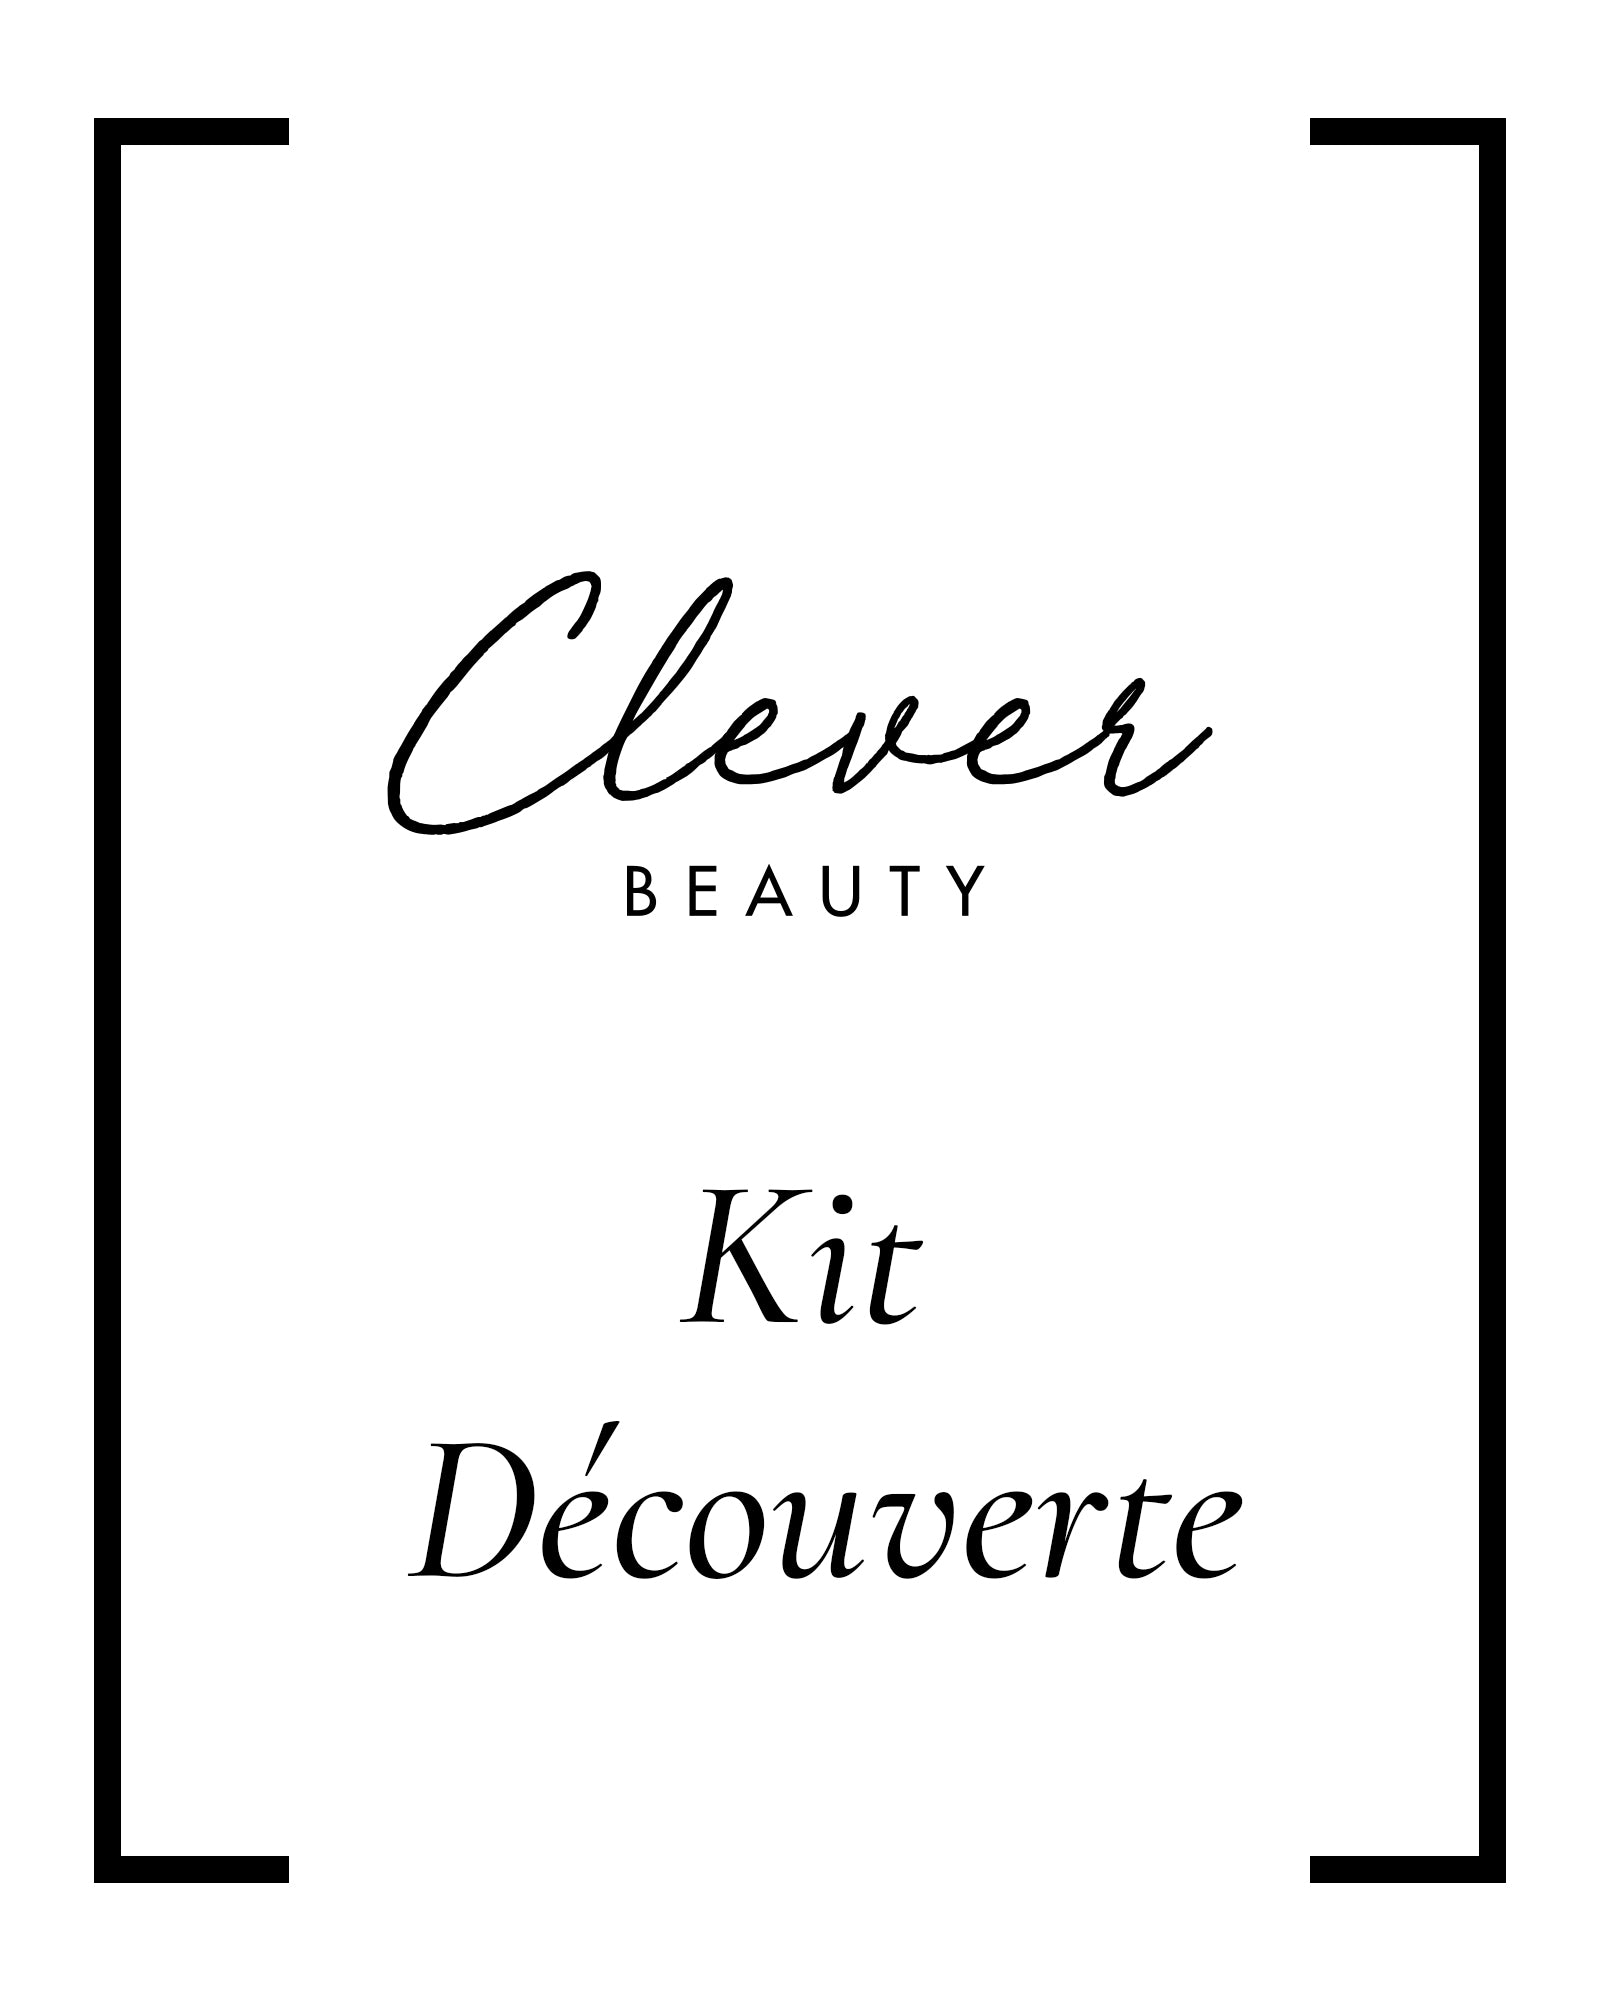 Clever Beauty Discovery Kit